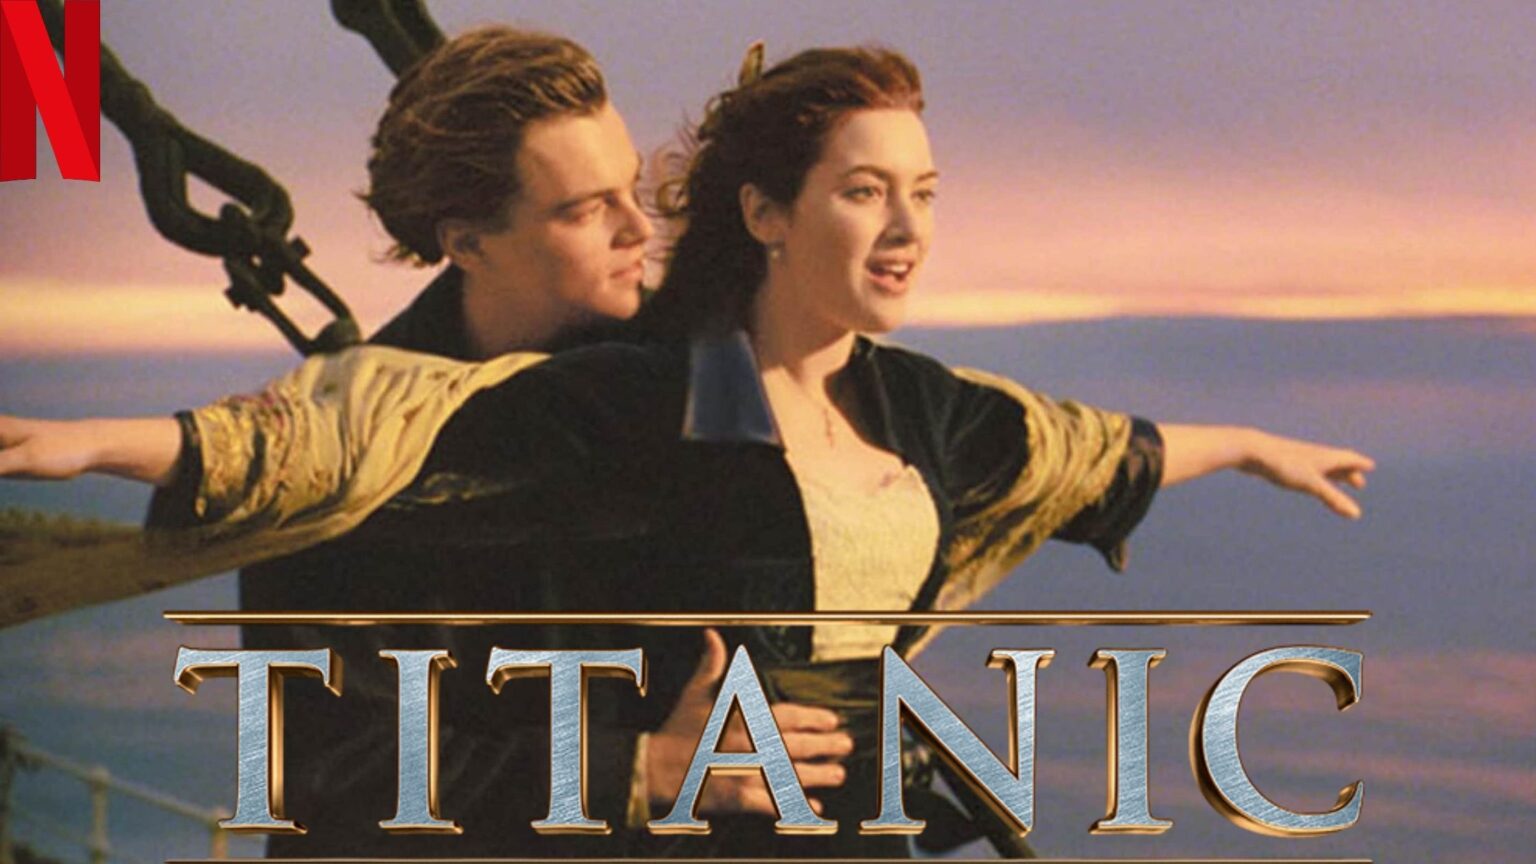 Titanic (1997) On NetFlix Watch it From Anywhere in the World